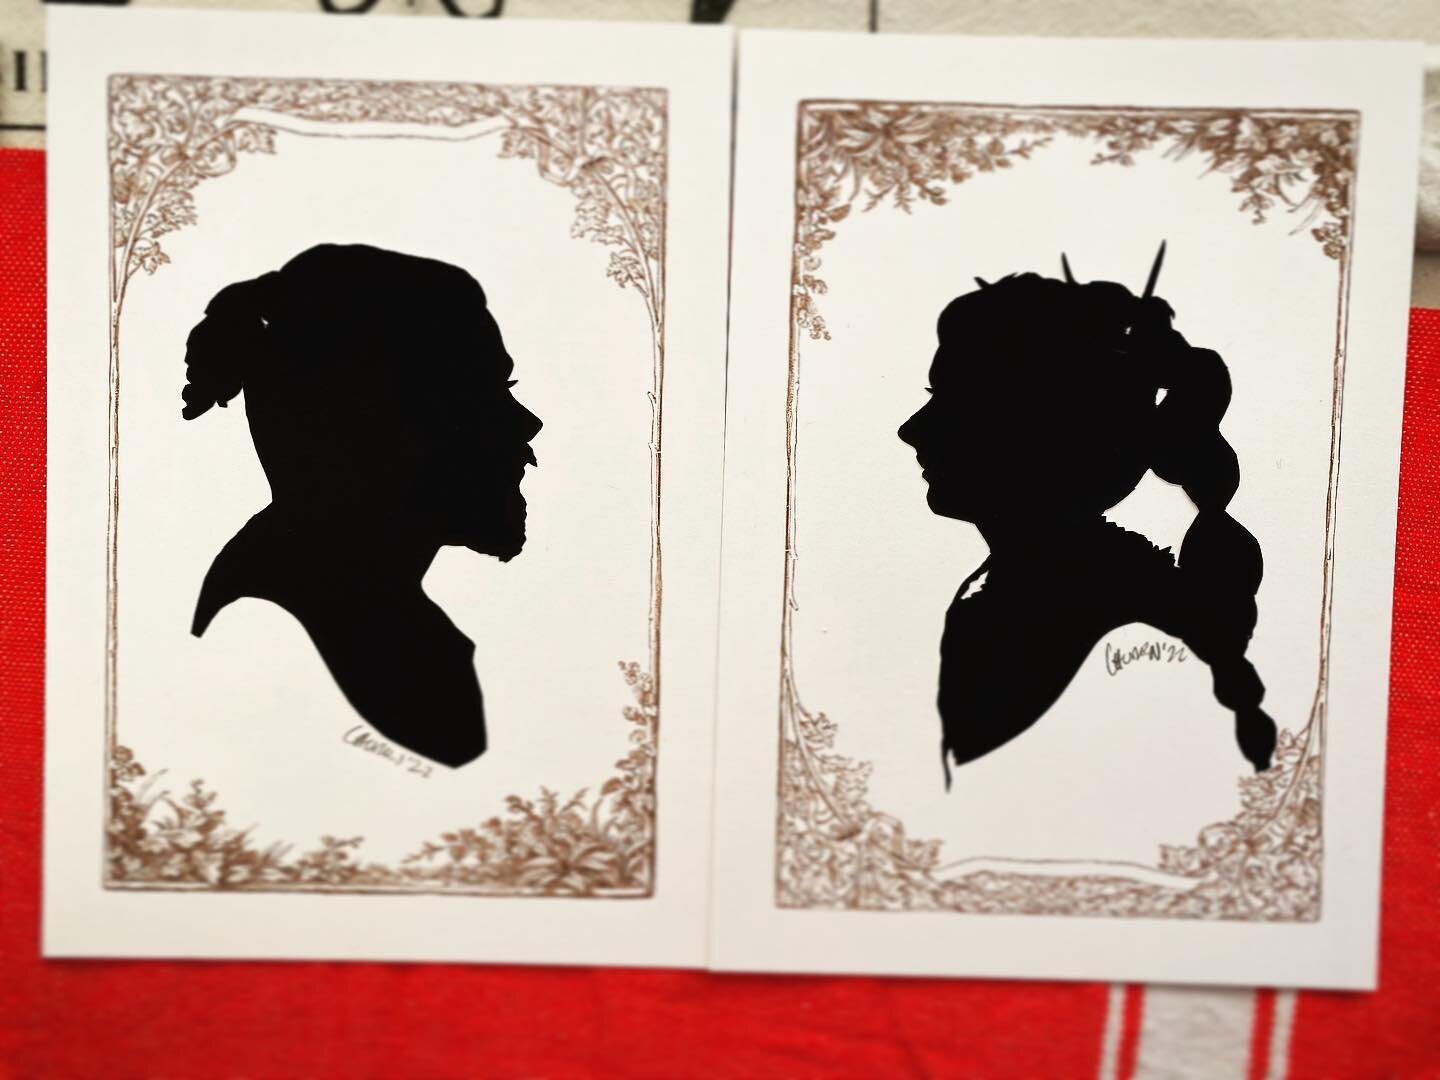 Another Renaissance Festival sneak peek: this fun couple wanted their portraits made with one of my custom-created backgrounds. 
.
I love how their wild-sides still connect with the delicate background
.
Cut freehand with only ✂️ in about 90 seconds 